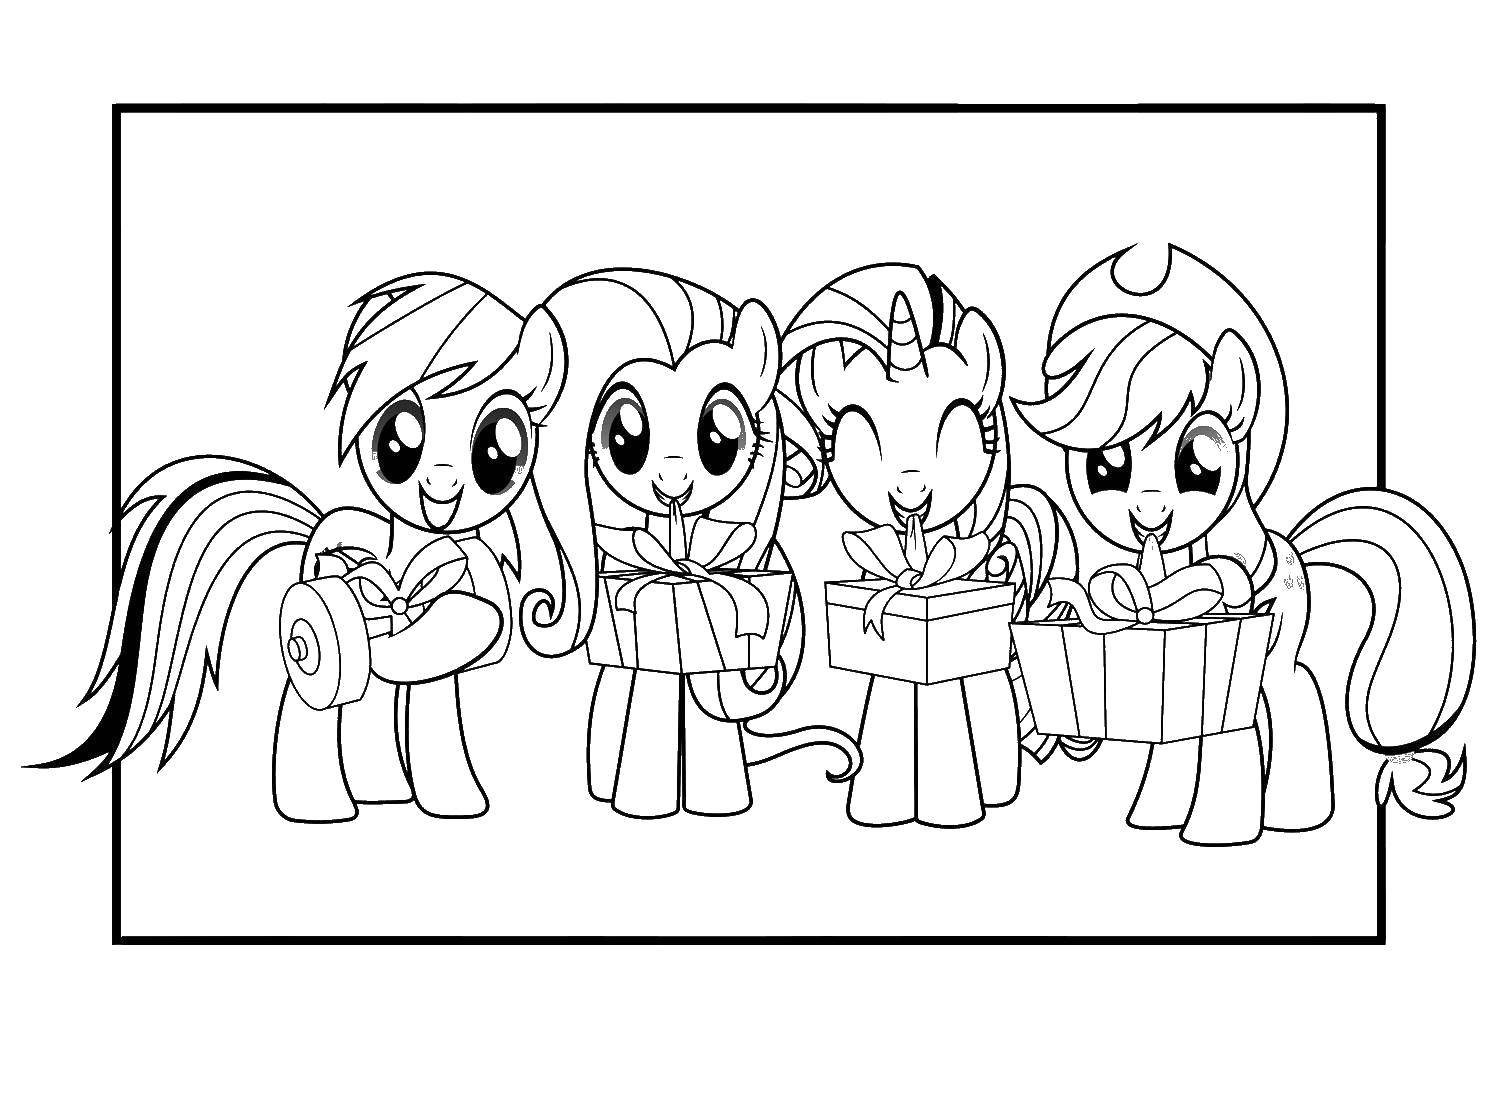 Coloring Ponies from my little pony with gifts. Category gifts. Tags:  Gifts, holiday, Pony.